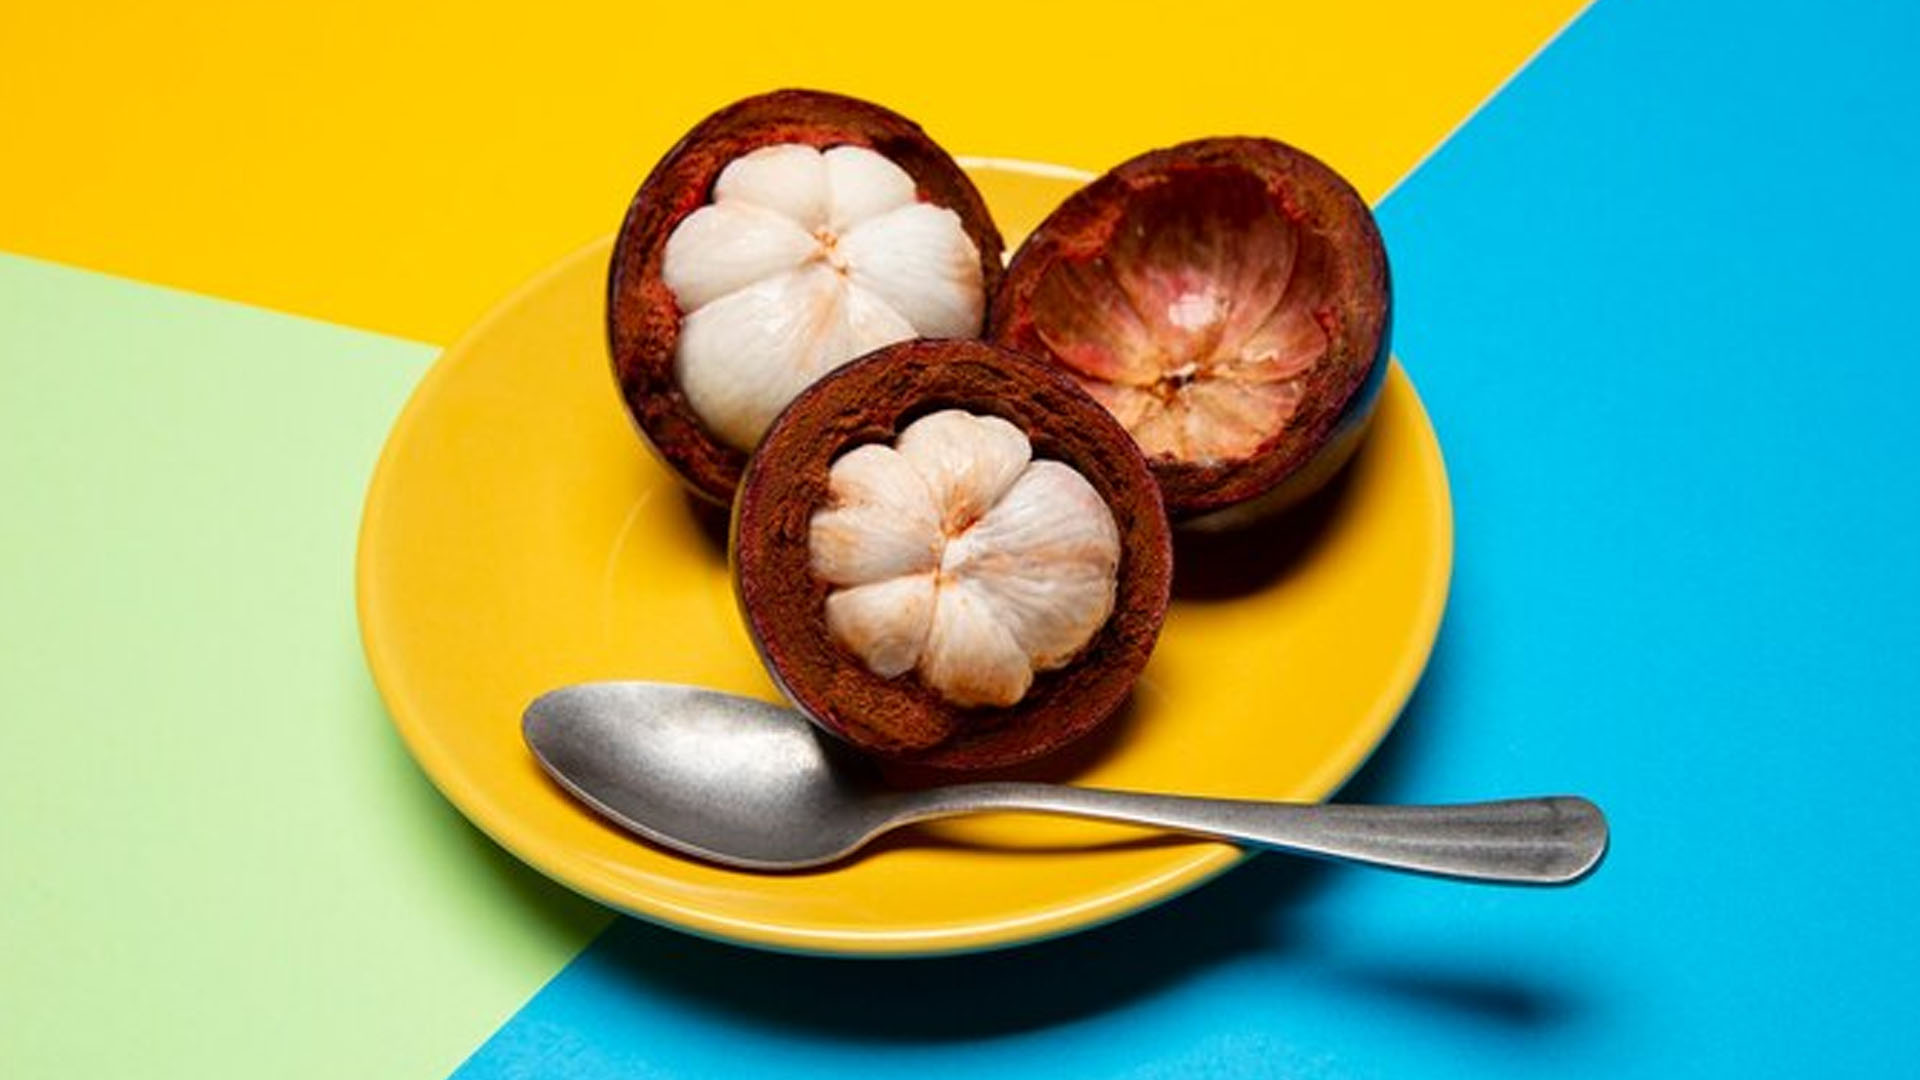 What Are The Health Benefits of Mangosteen Fruit Health Benefits?